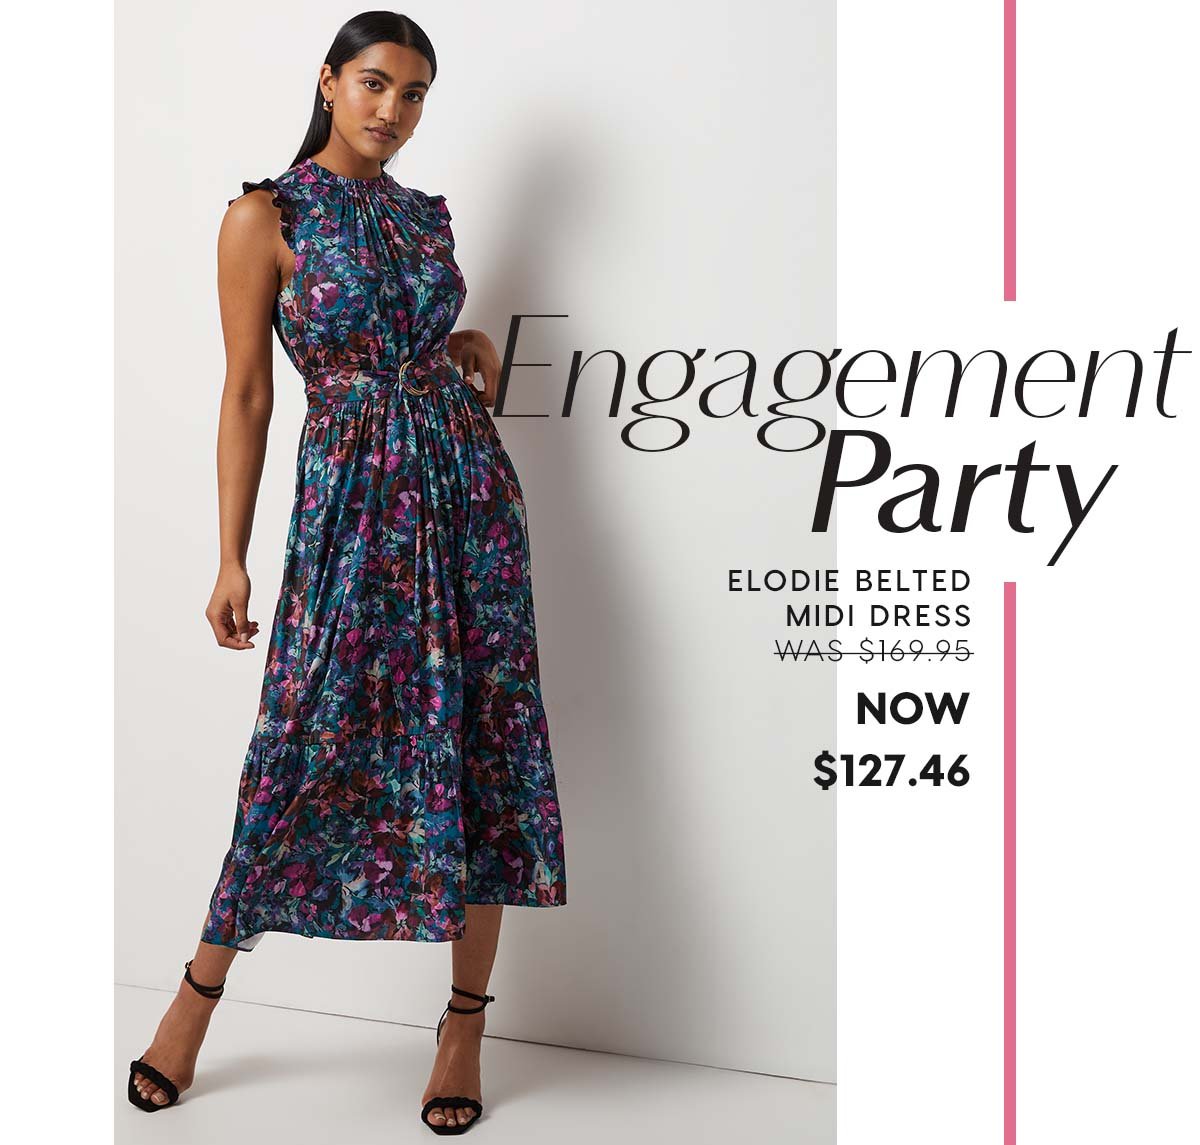 Engagement Party. Elodie Belted Midi Dress WAS $169.95 NOW  $127.46